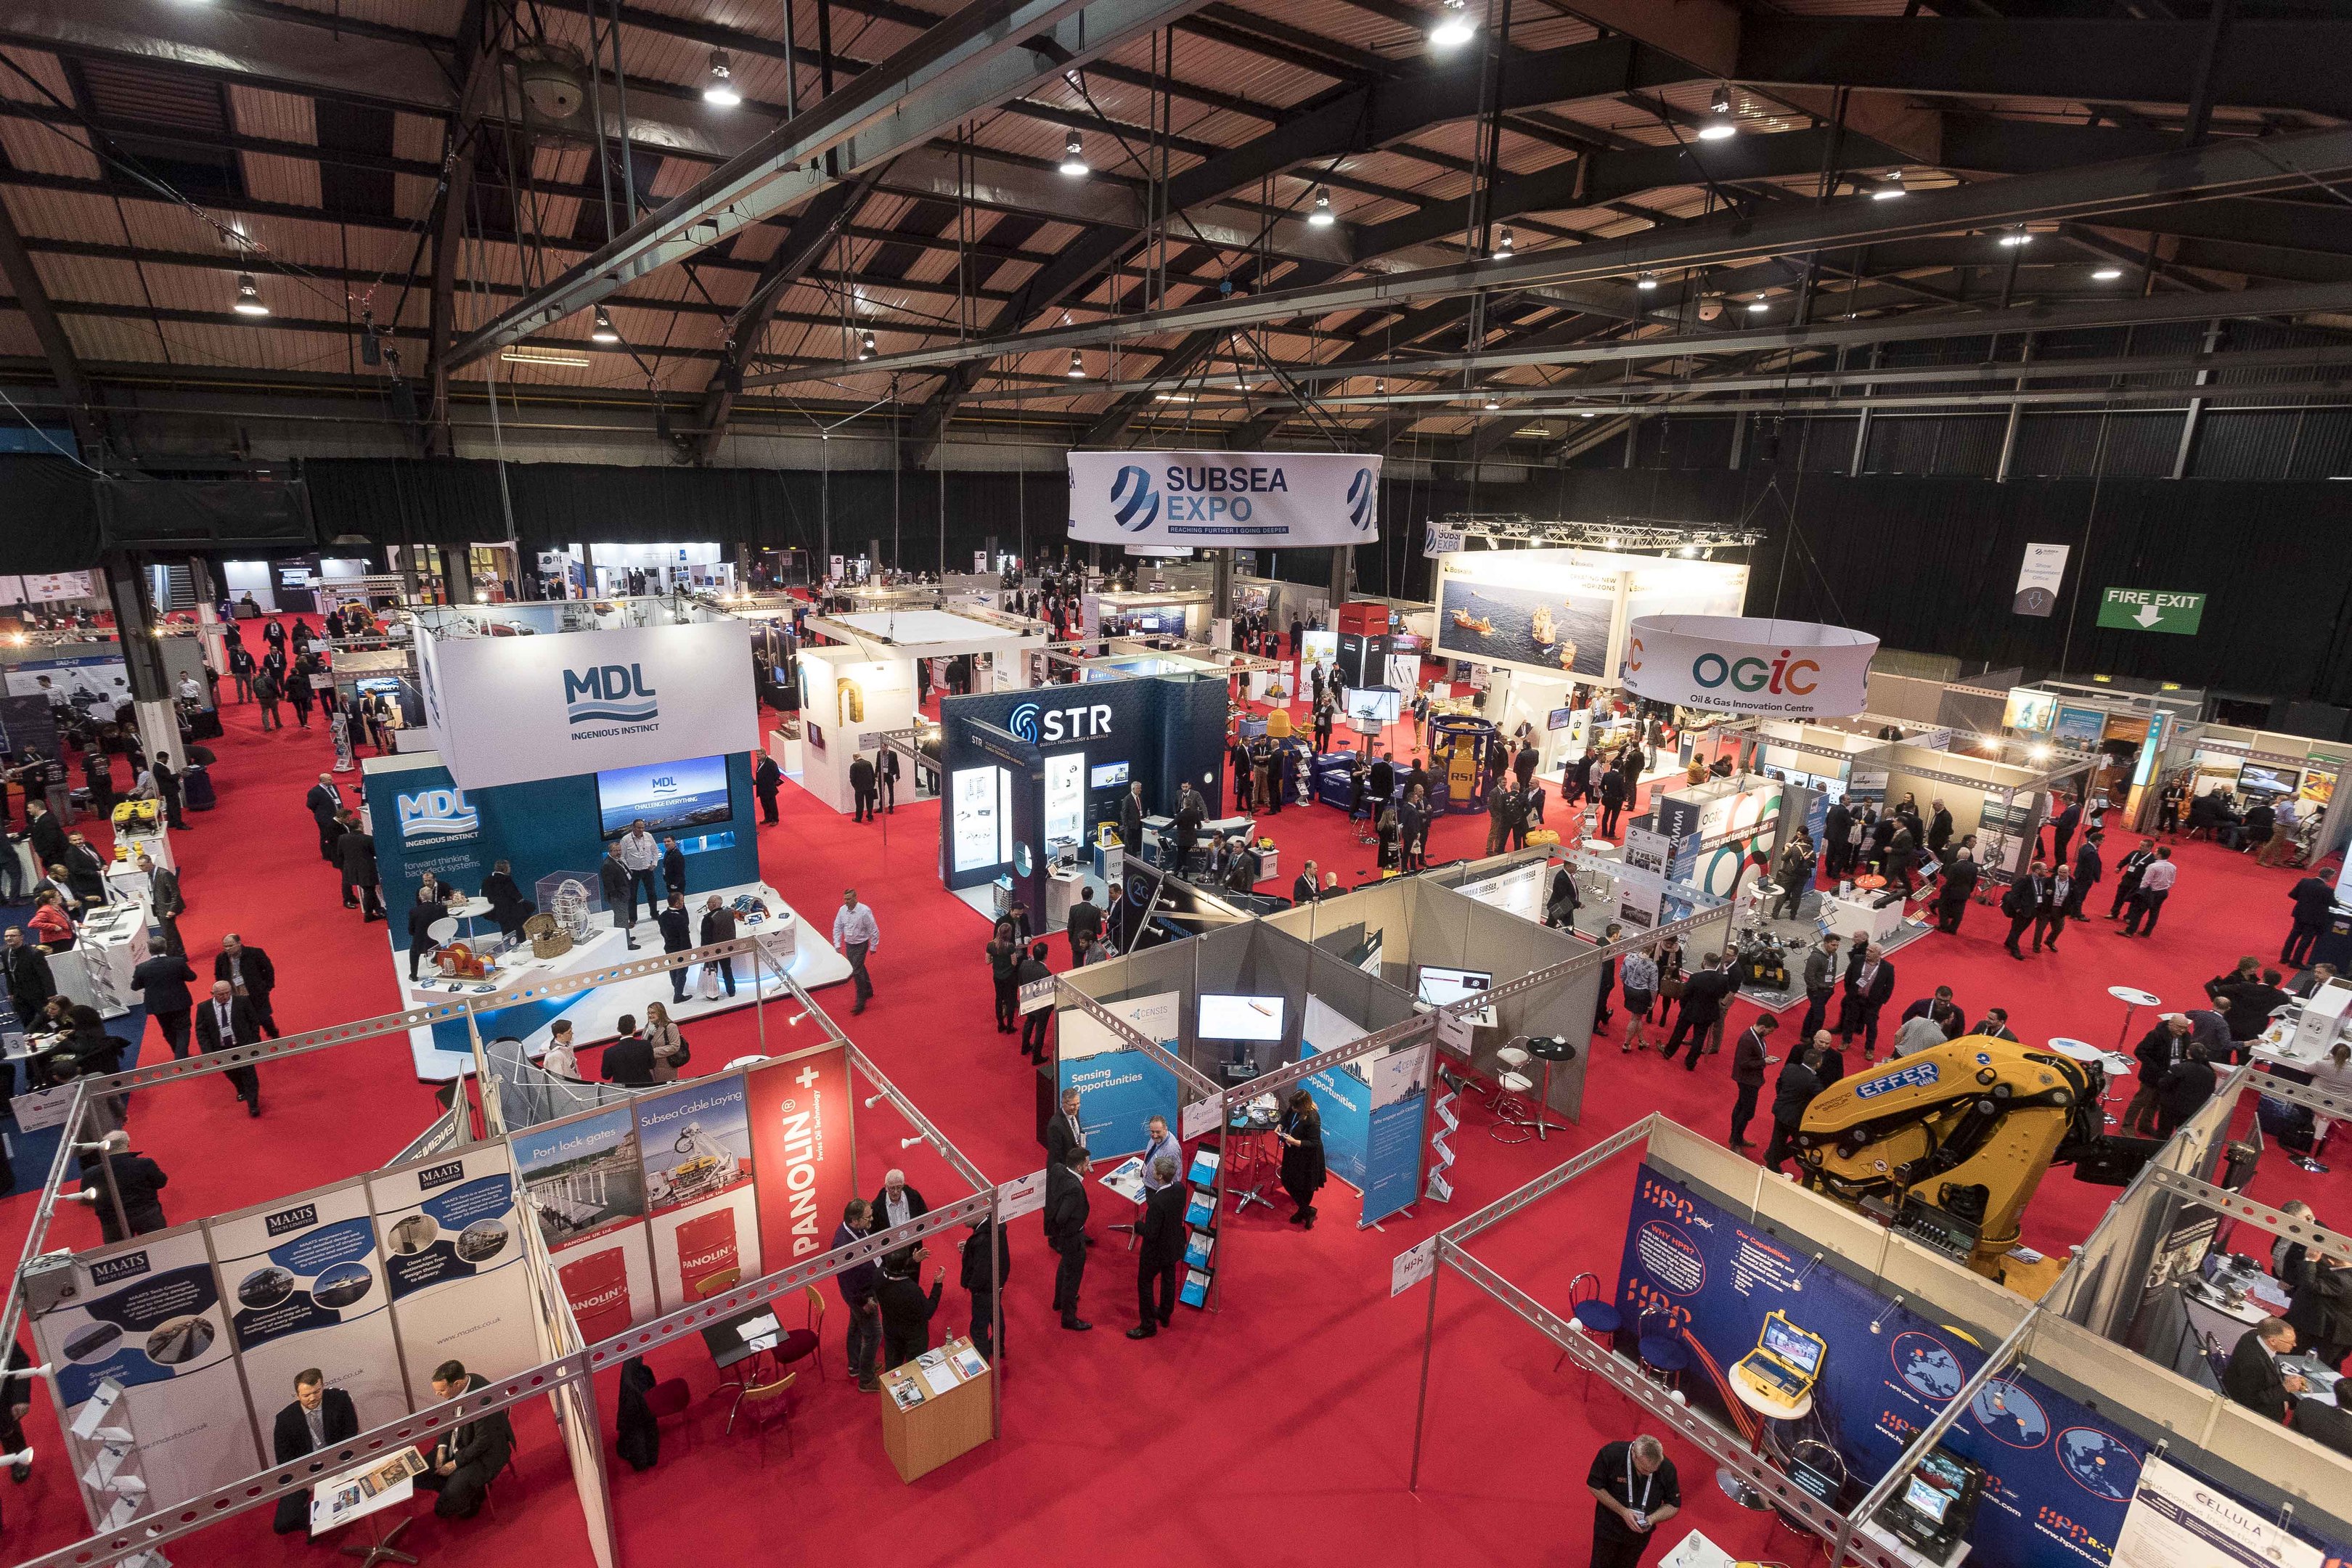 SUBSEA EXPO 2018 AT ABERDEEN EXHIBITION AND CONFERENCE CENTRE.
DAY 2
PICTURE ISSUED BY SUBSEA UK AND FREE TO USE